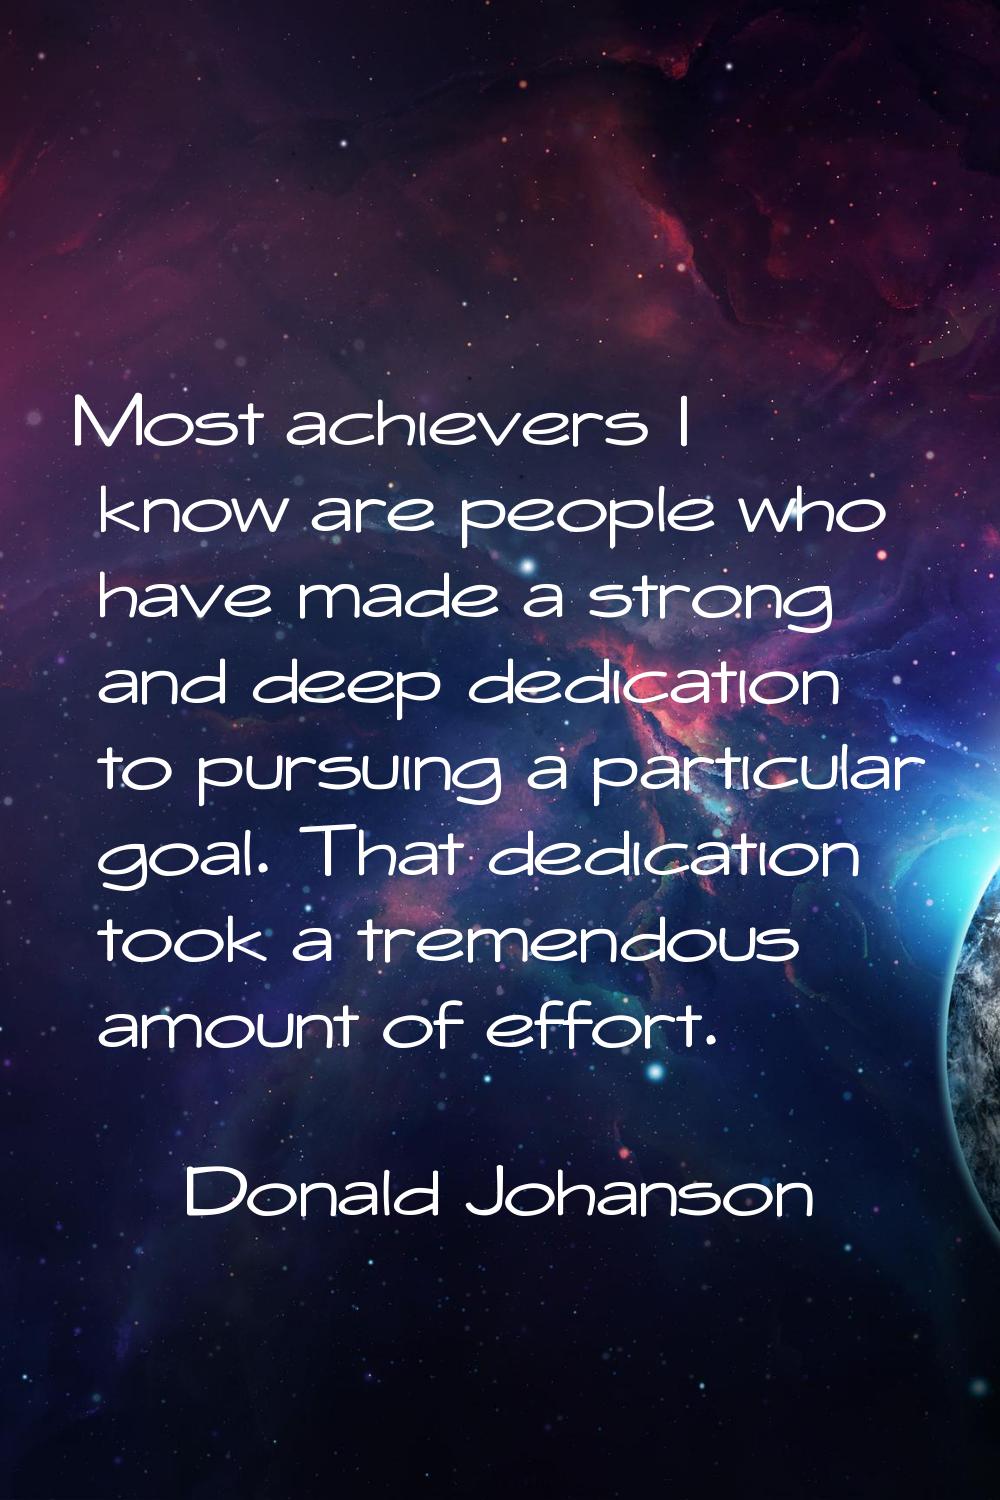 Most achievers I know are people who have made a strong and deep dedication to pursuing a particula